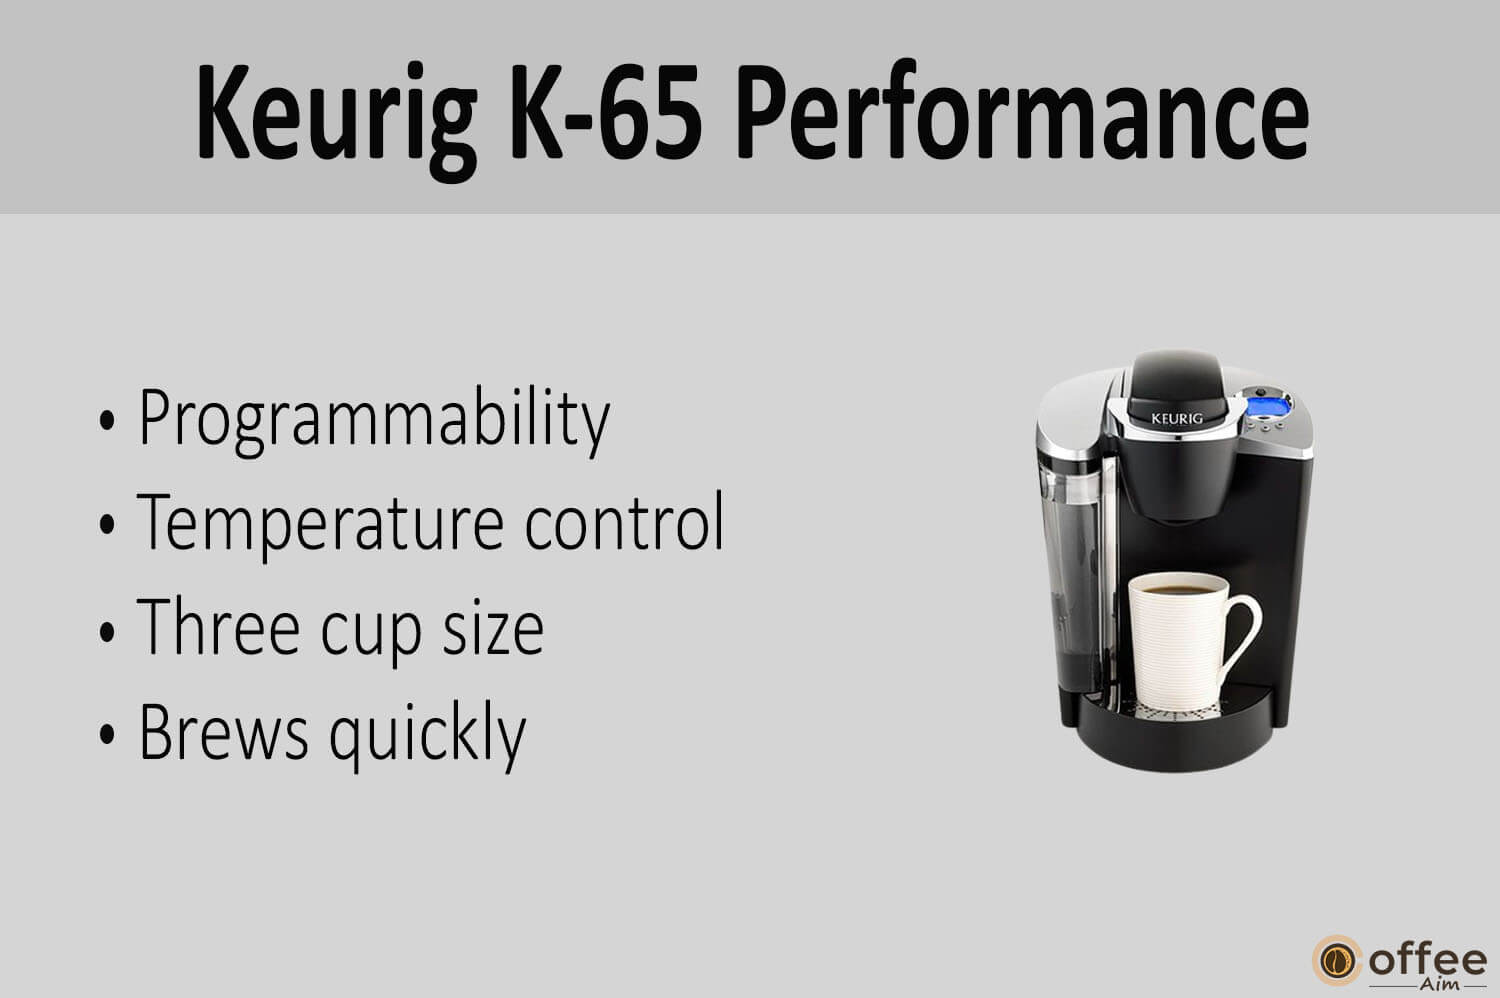 "The image vividly illustrates the performance metrics of the Keurig K-65 machine, providing readers with a tangible insight as they delve into our thorough Keurig K-65 review."